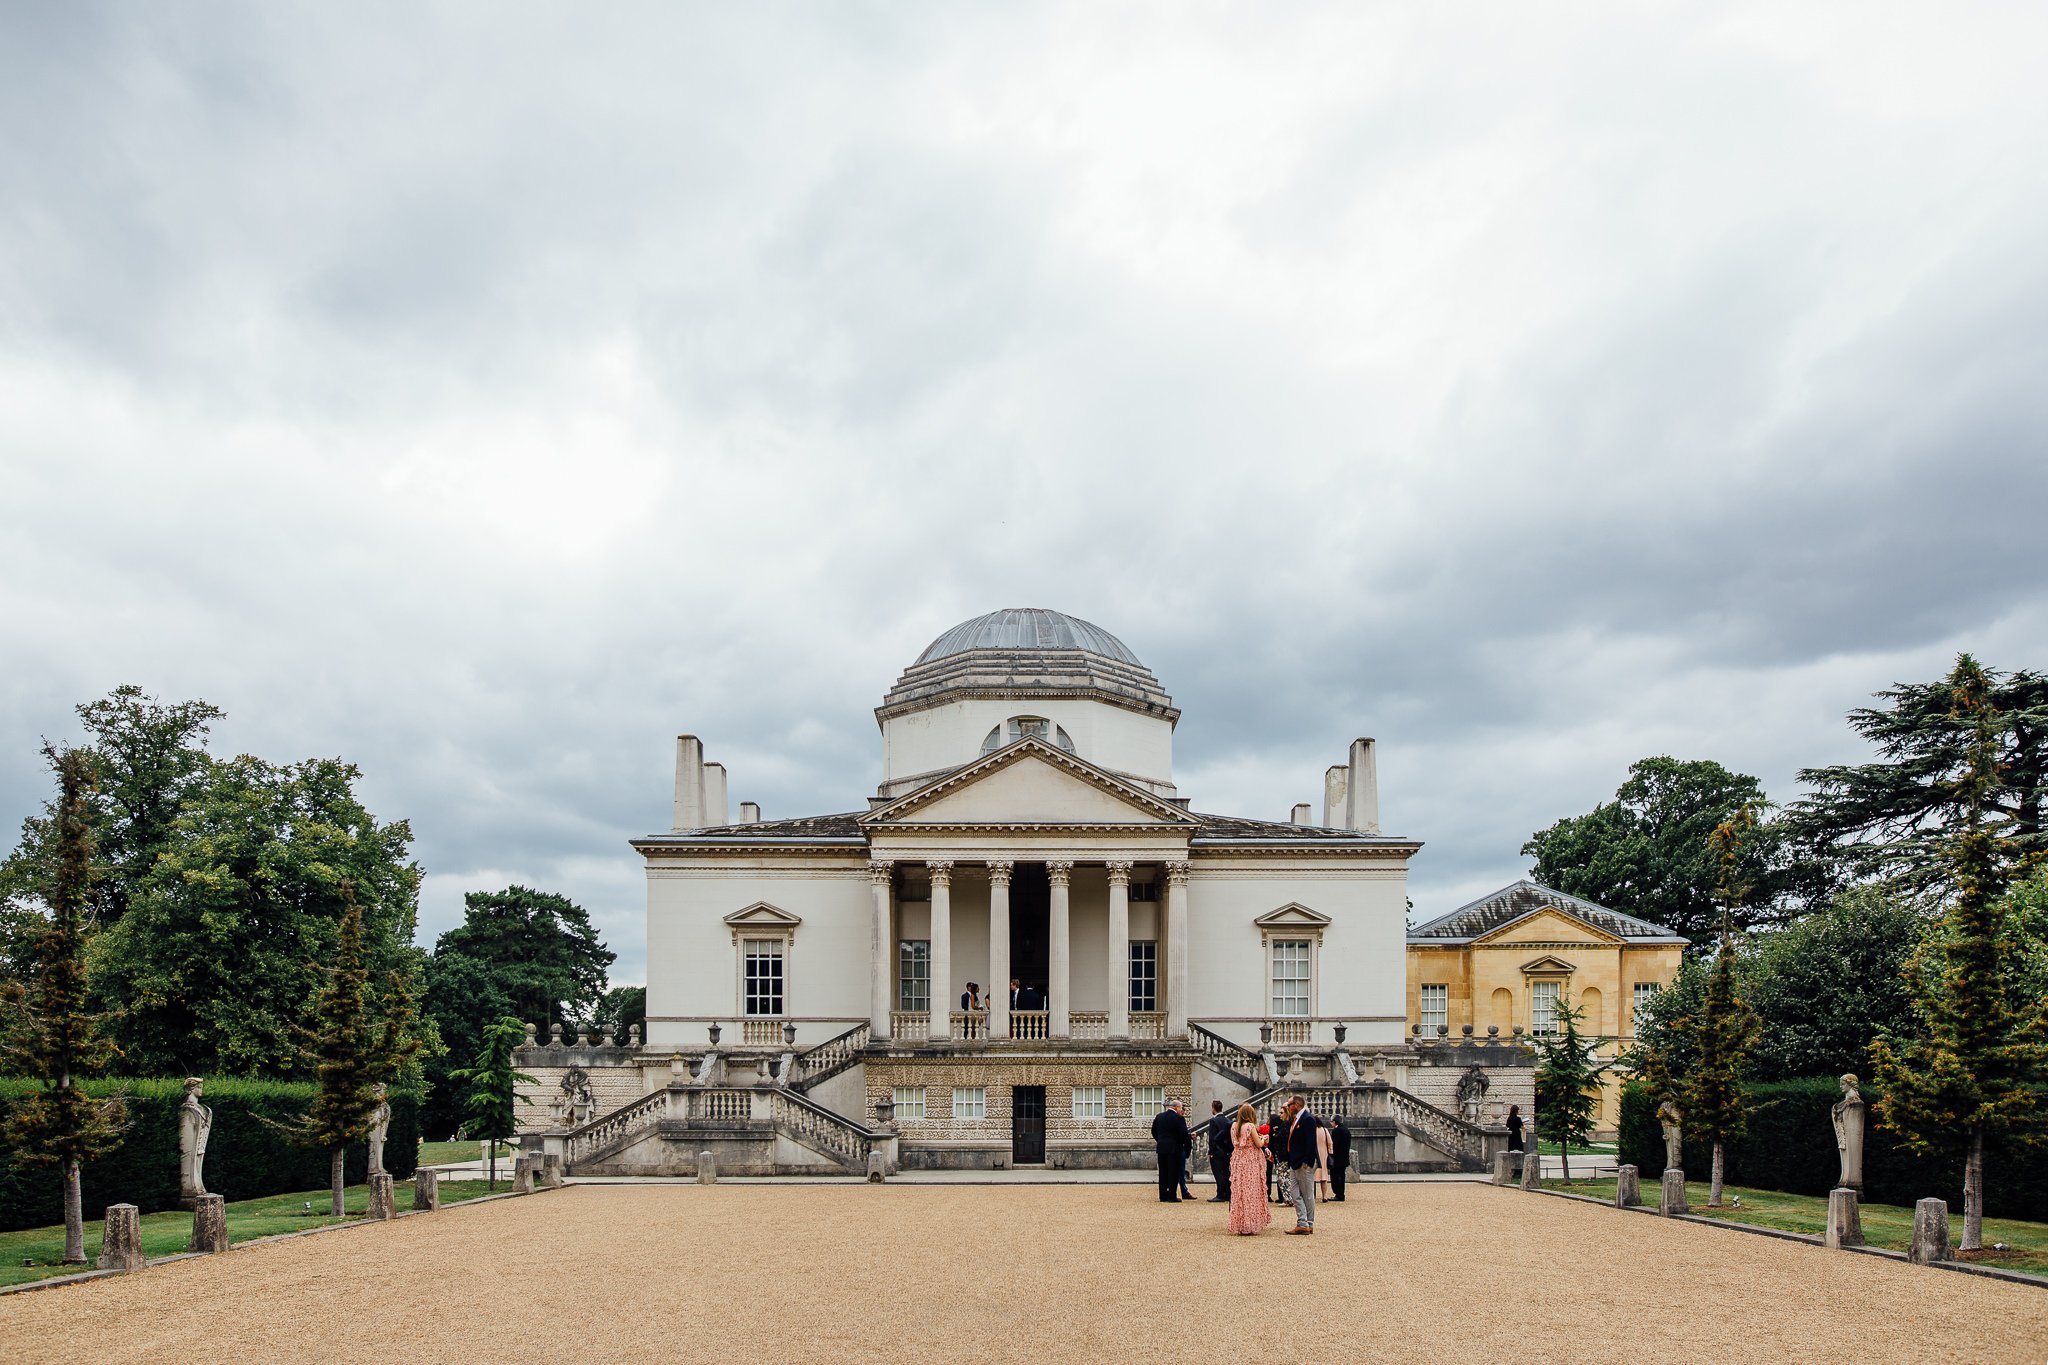  The main building at Chiswick House and Gardens 